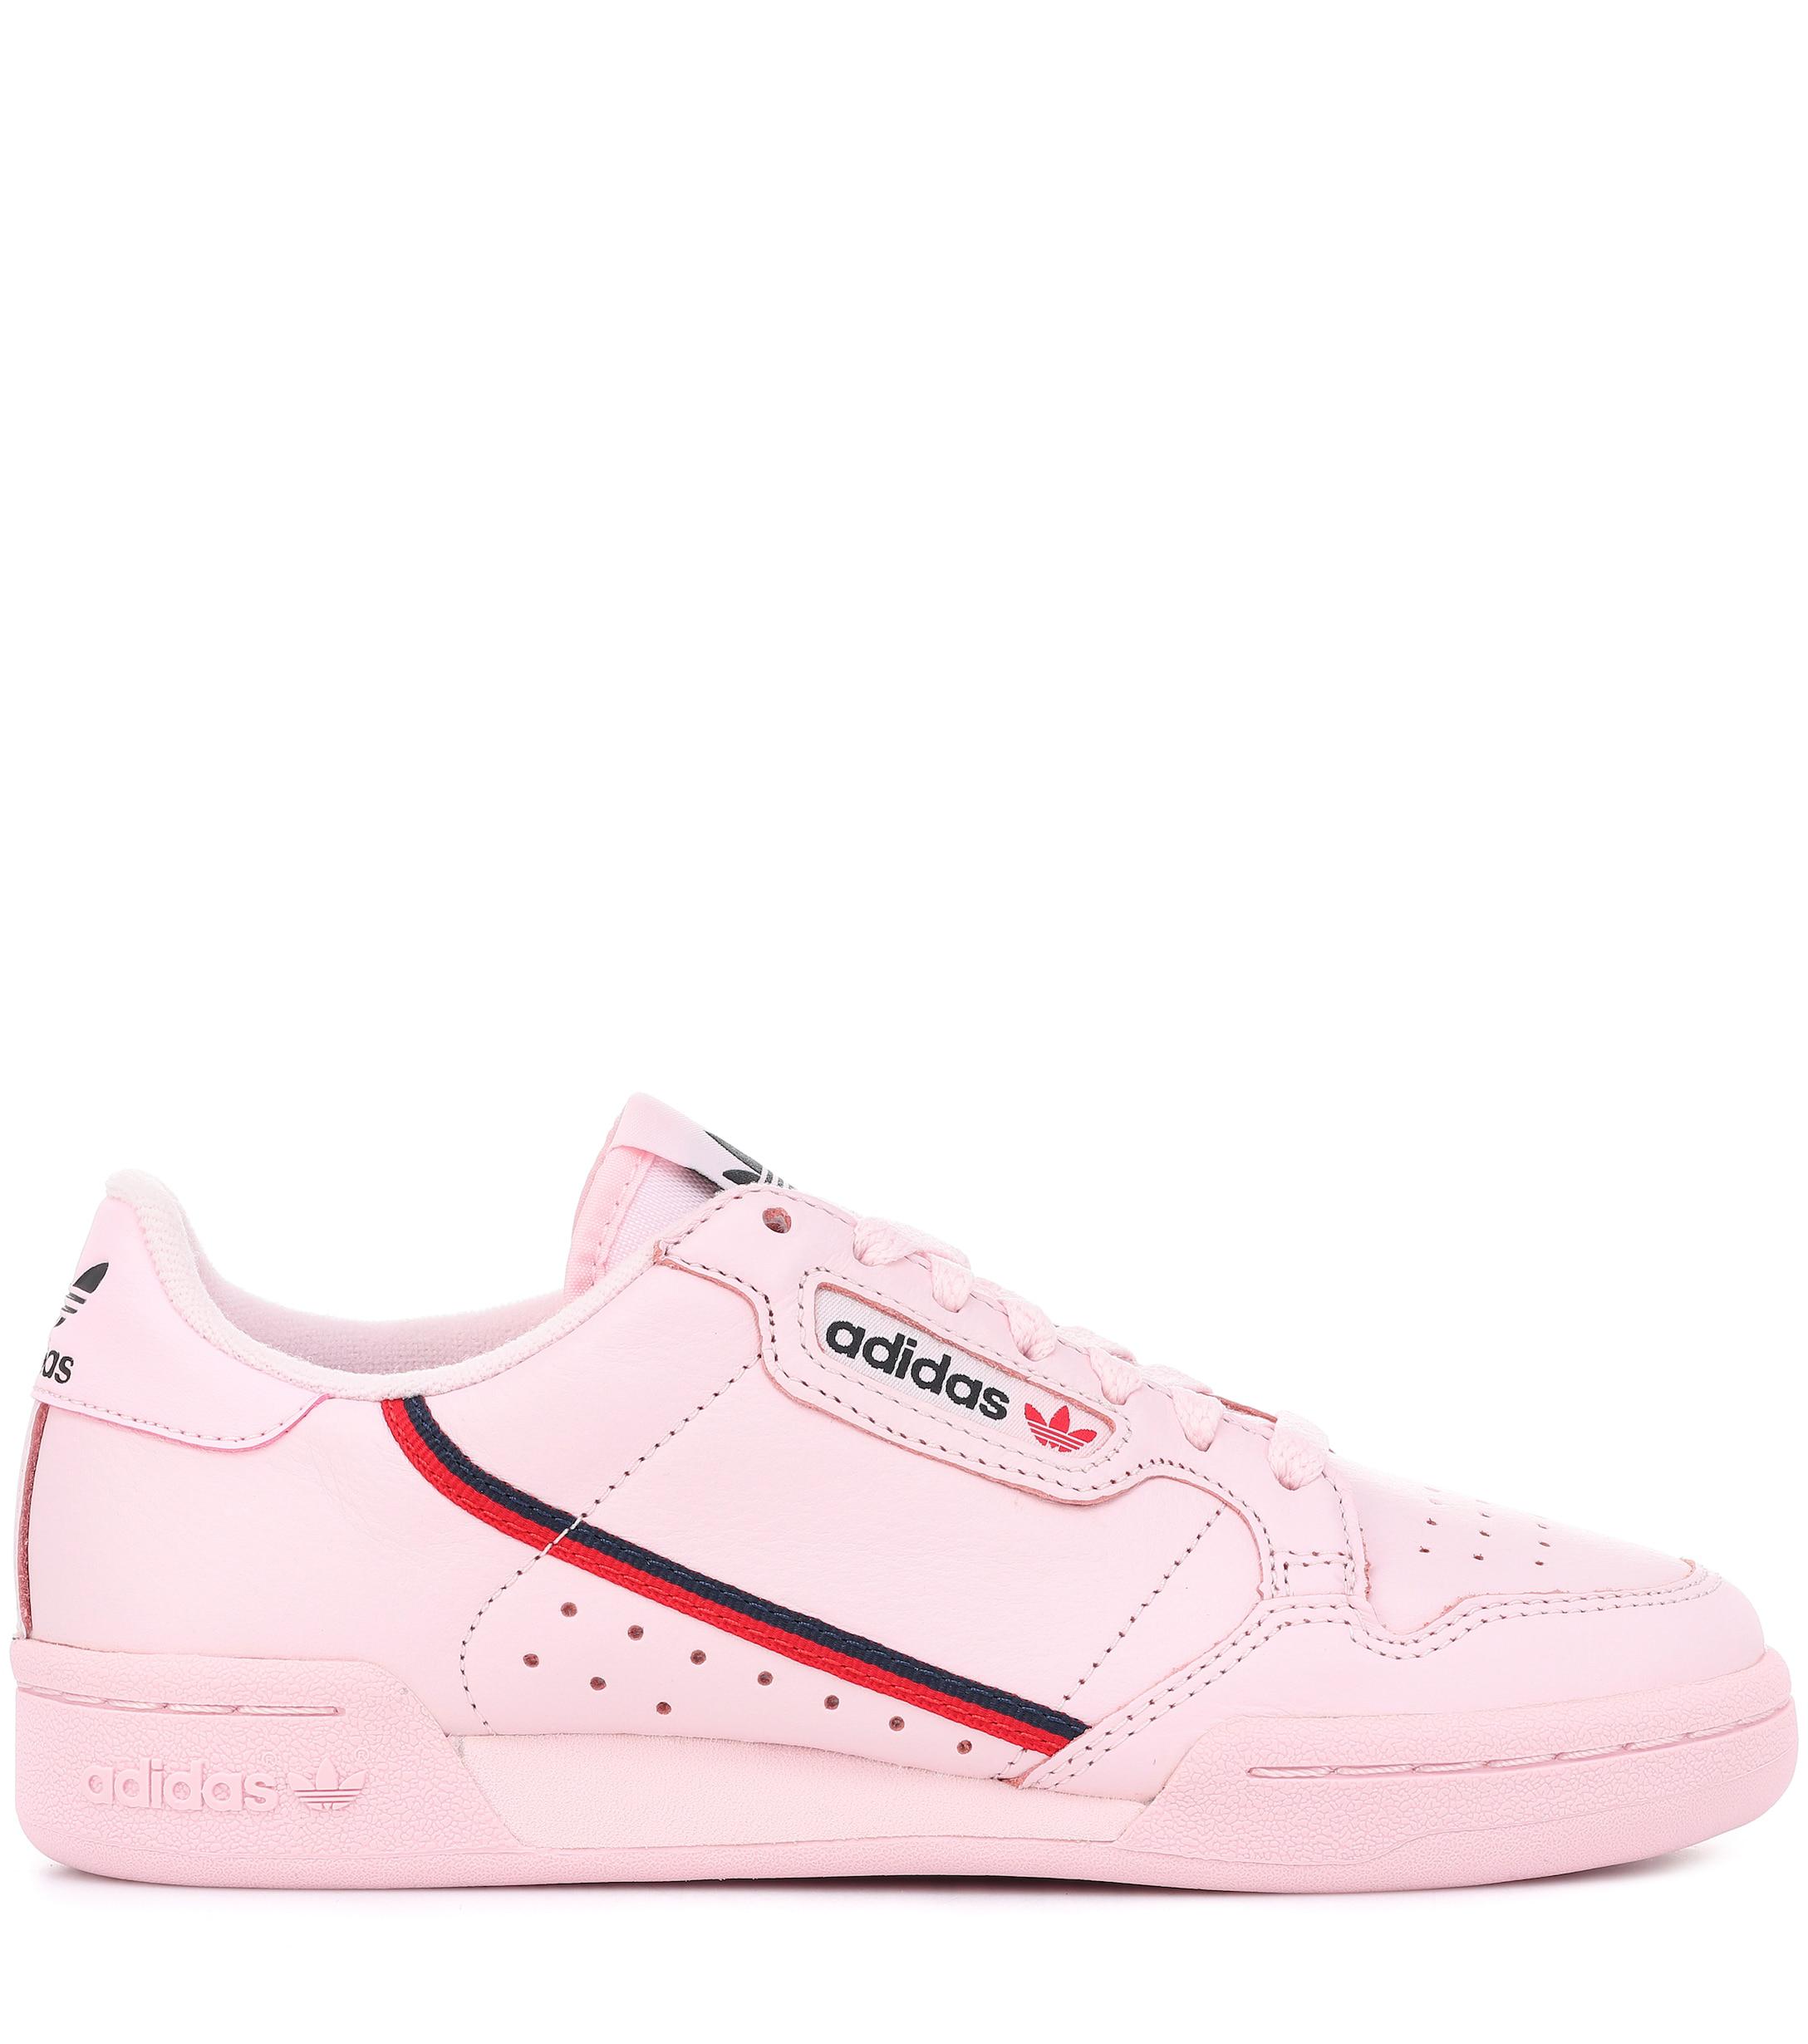 adidas Originals Continental 80 Leather Sneakers in Pink - Lyst